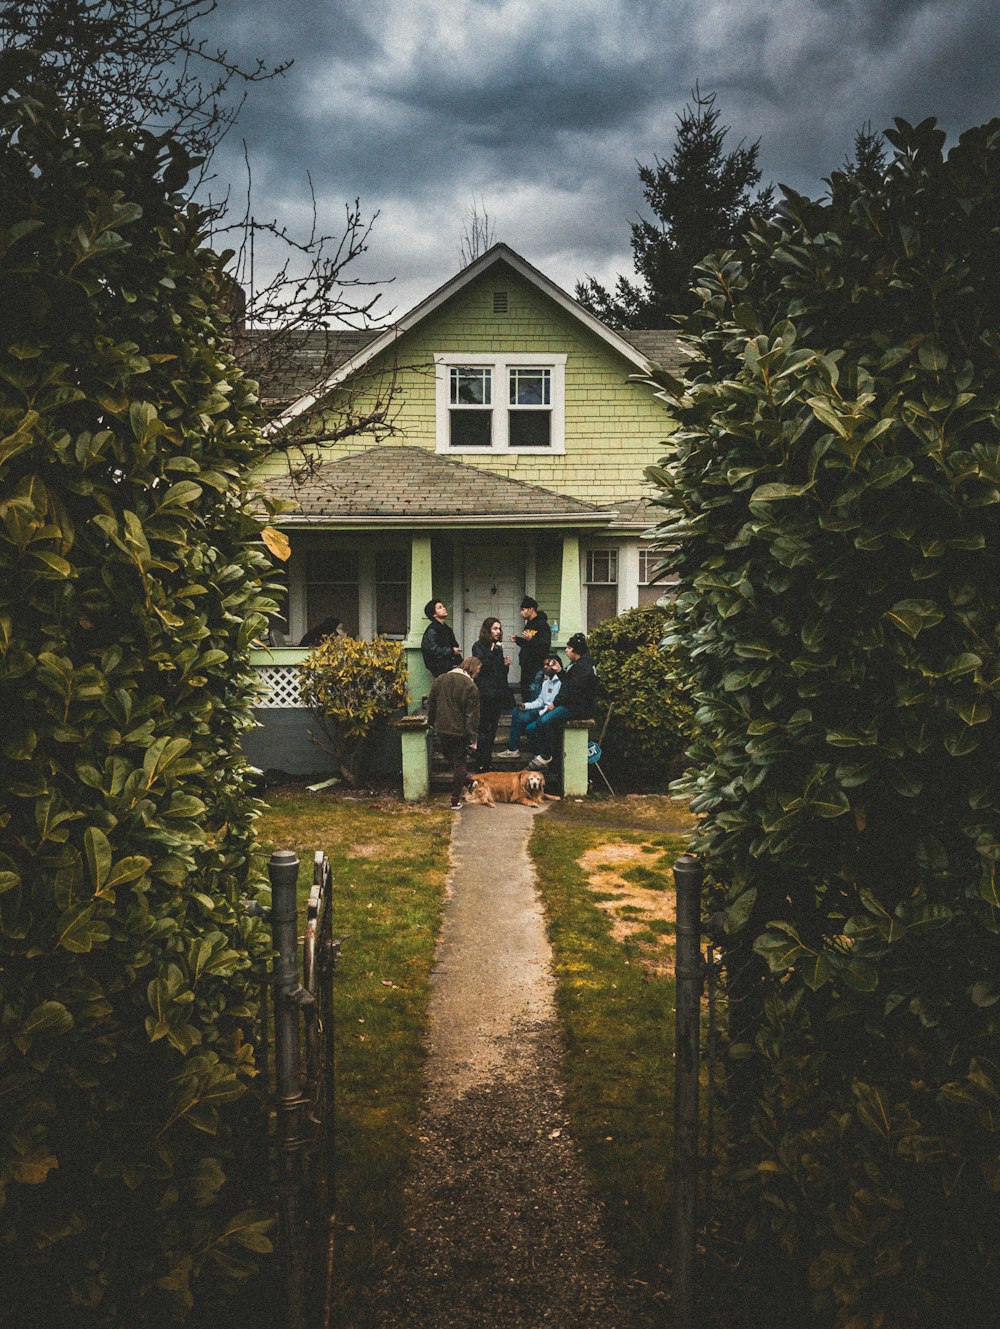 750+ Beautiful House Pictures  Download Free Images on Unsplash